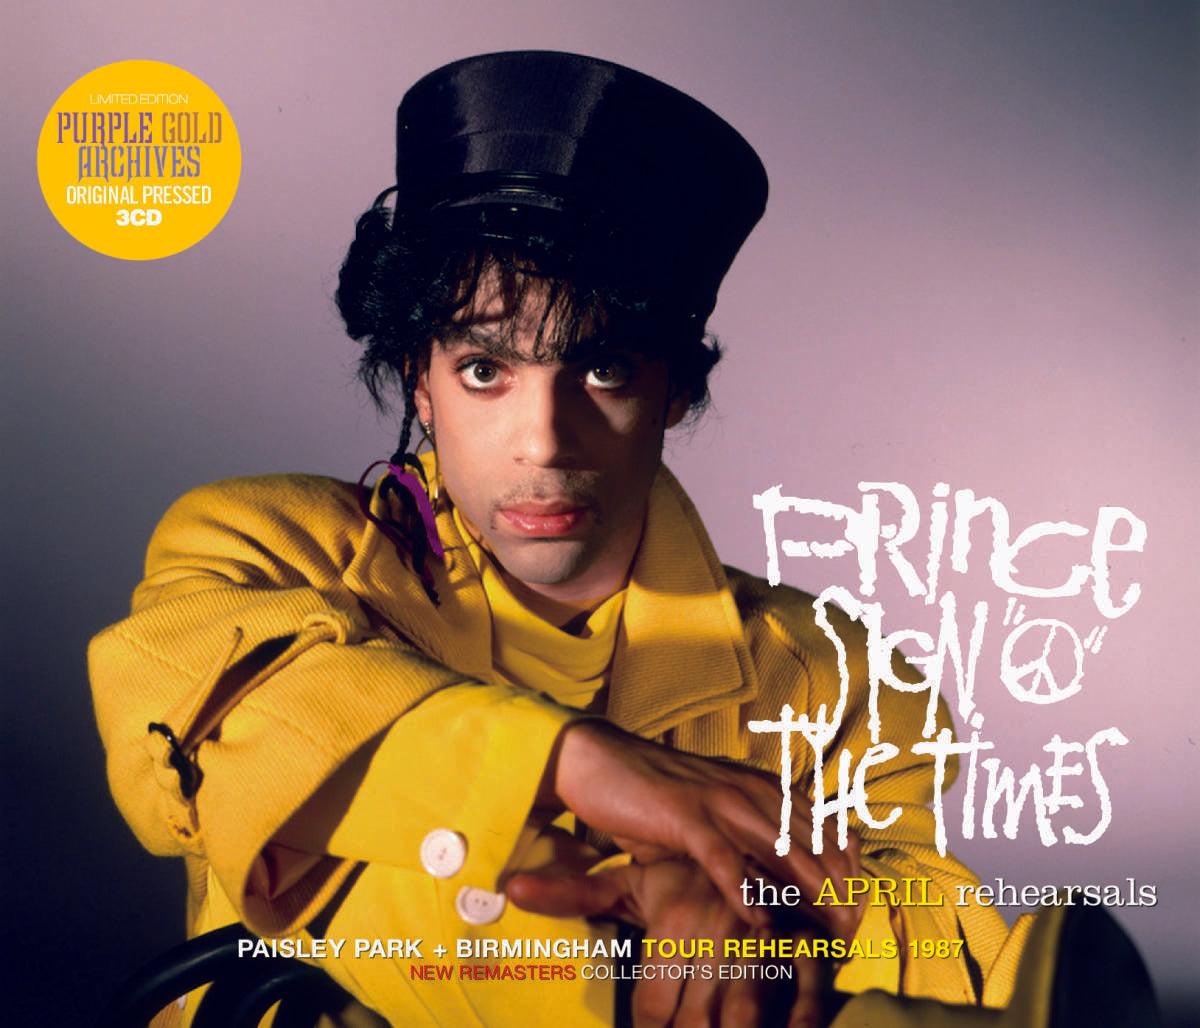 Prince Sign O The Times The April Rehearsals 3CD Paisley Park 1987 